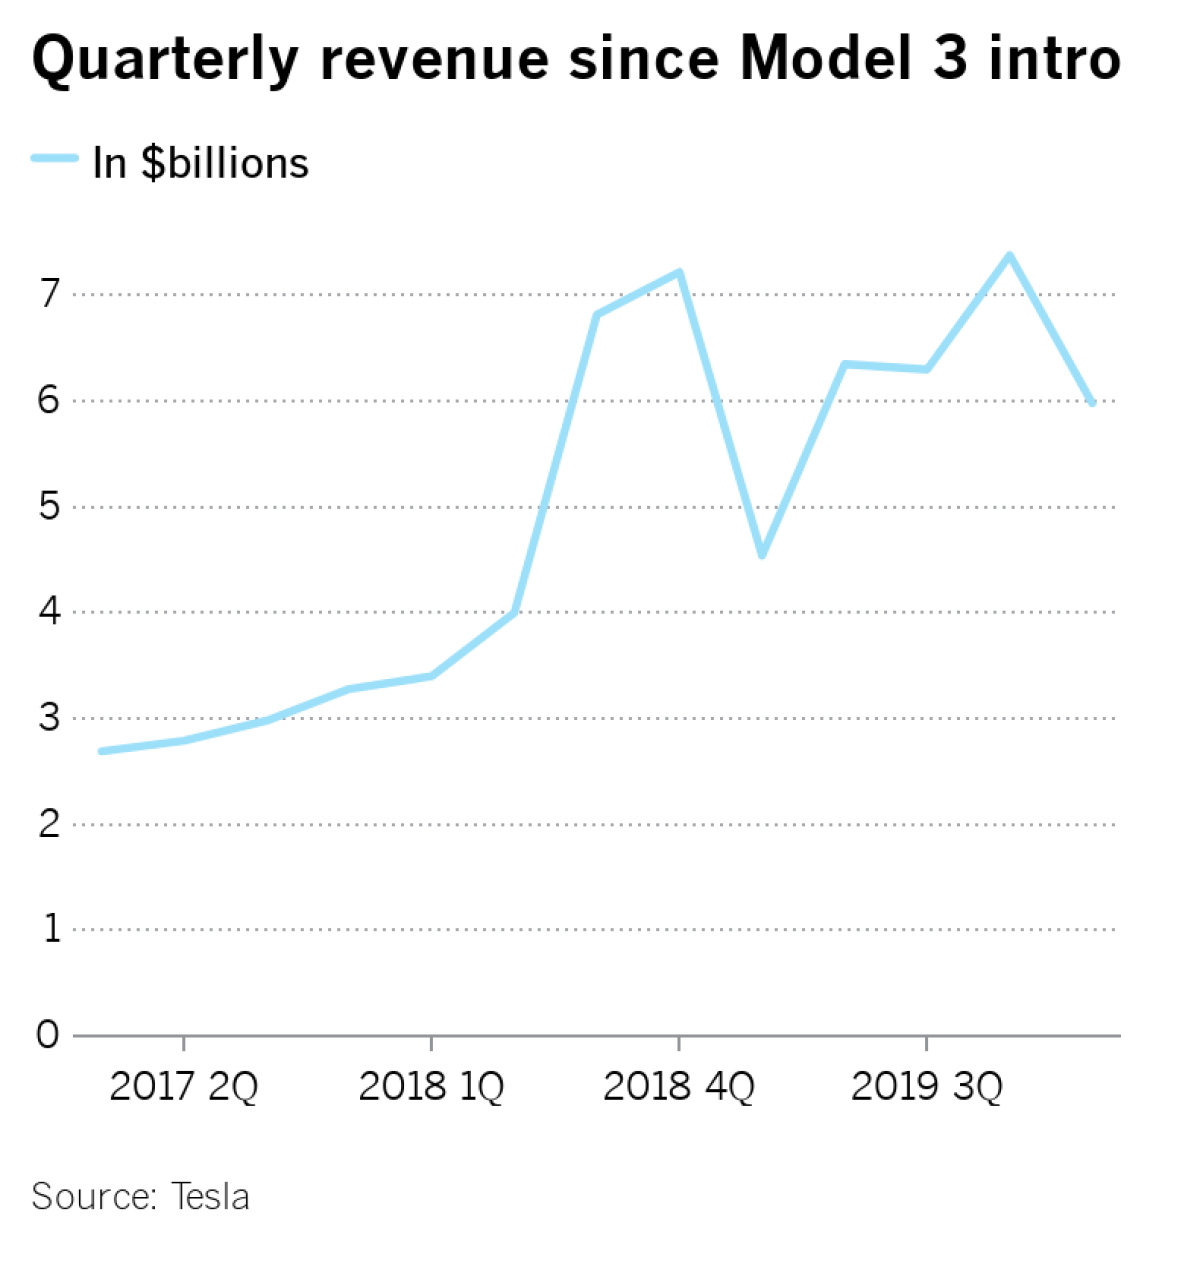 Tesla's fairly flat revenue chart from 2017 to first quarter 2020